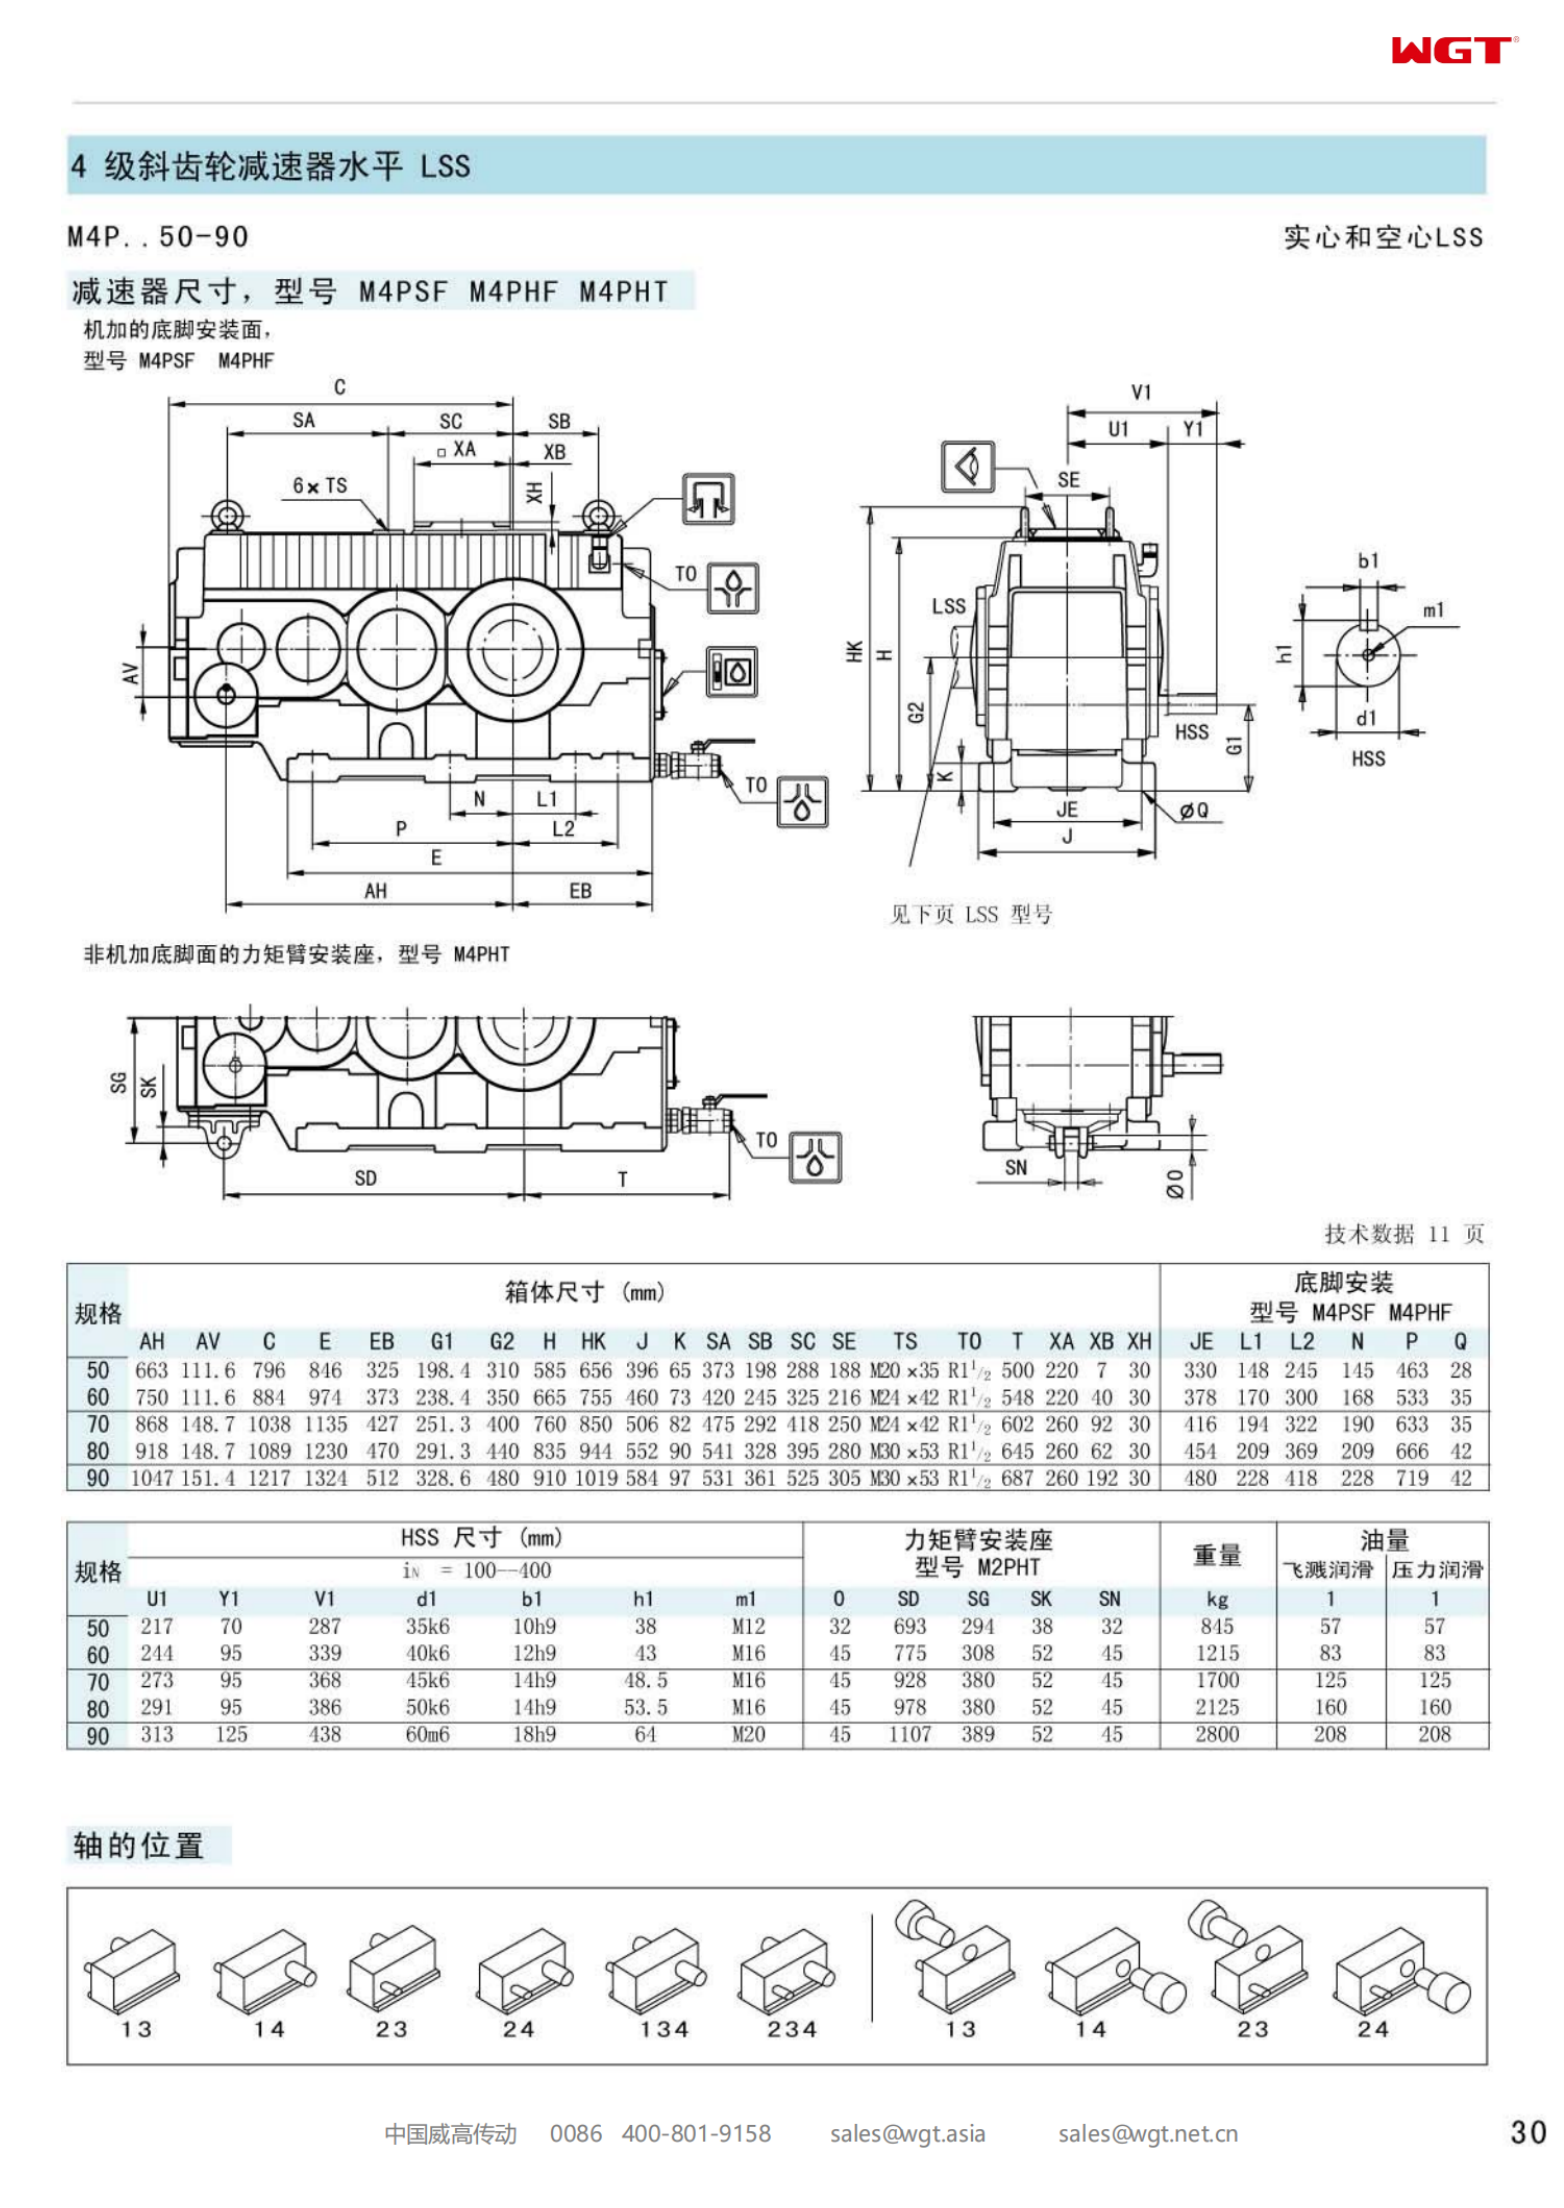 M4PHF90 Replace_SEW_M_Series Gearbox